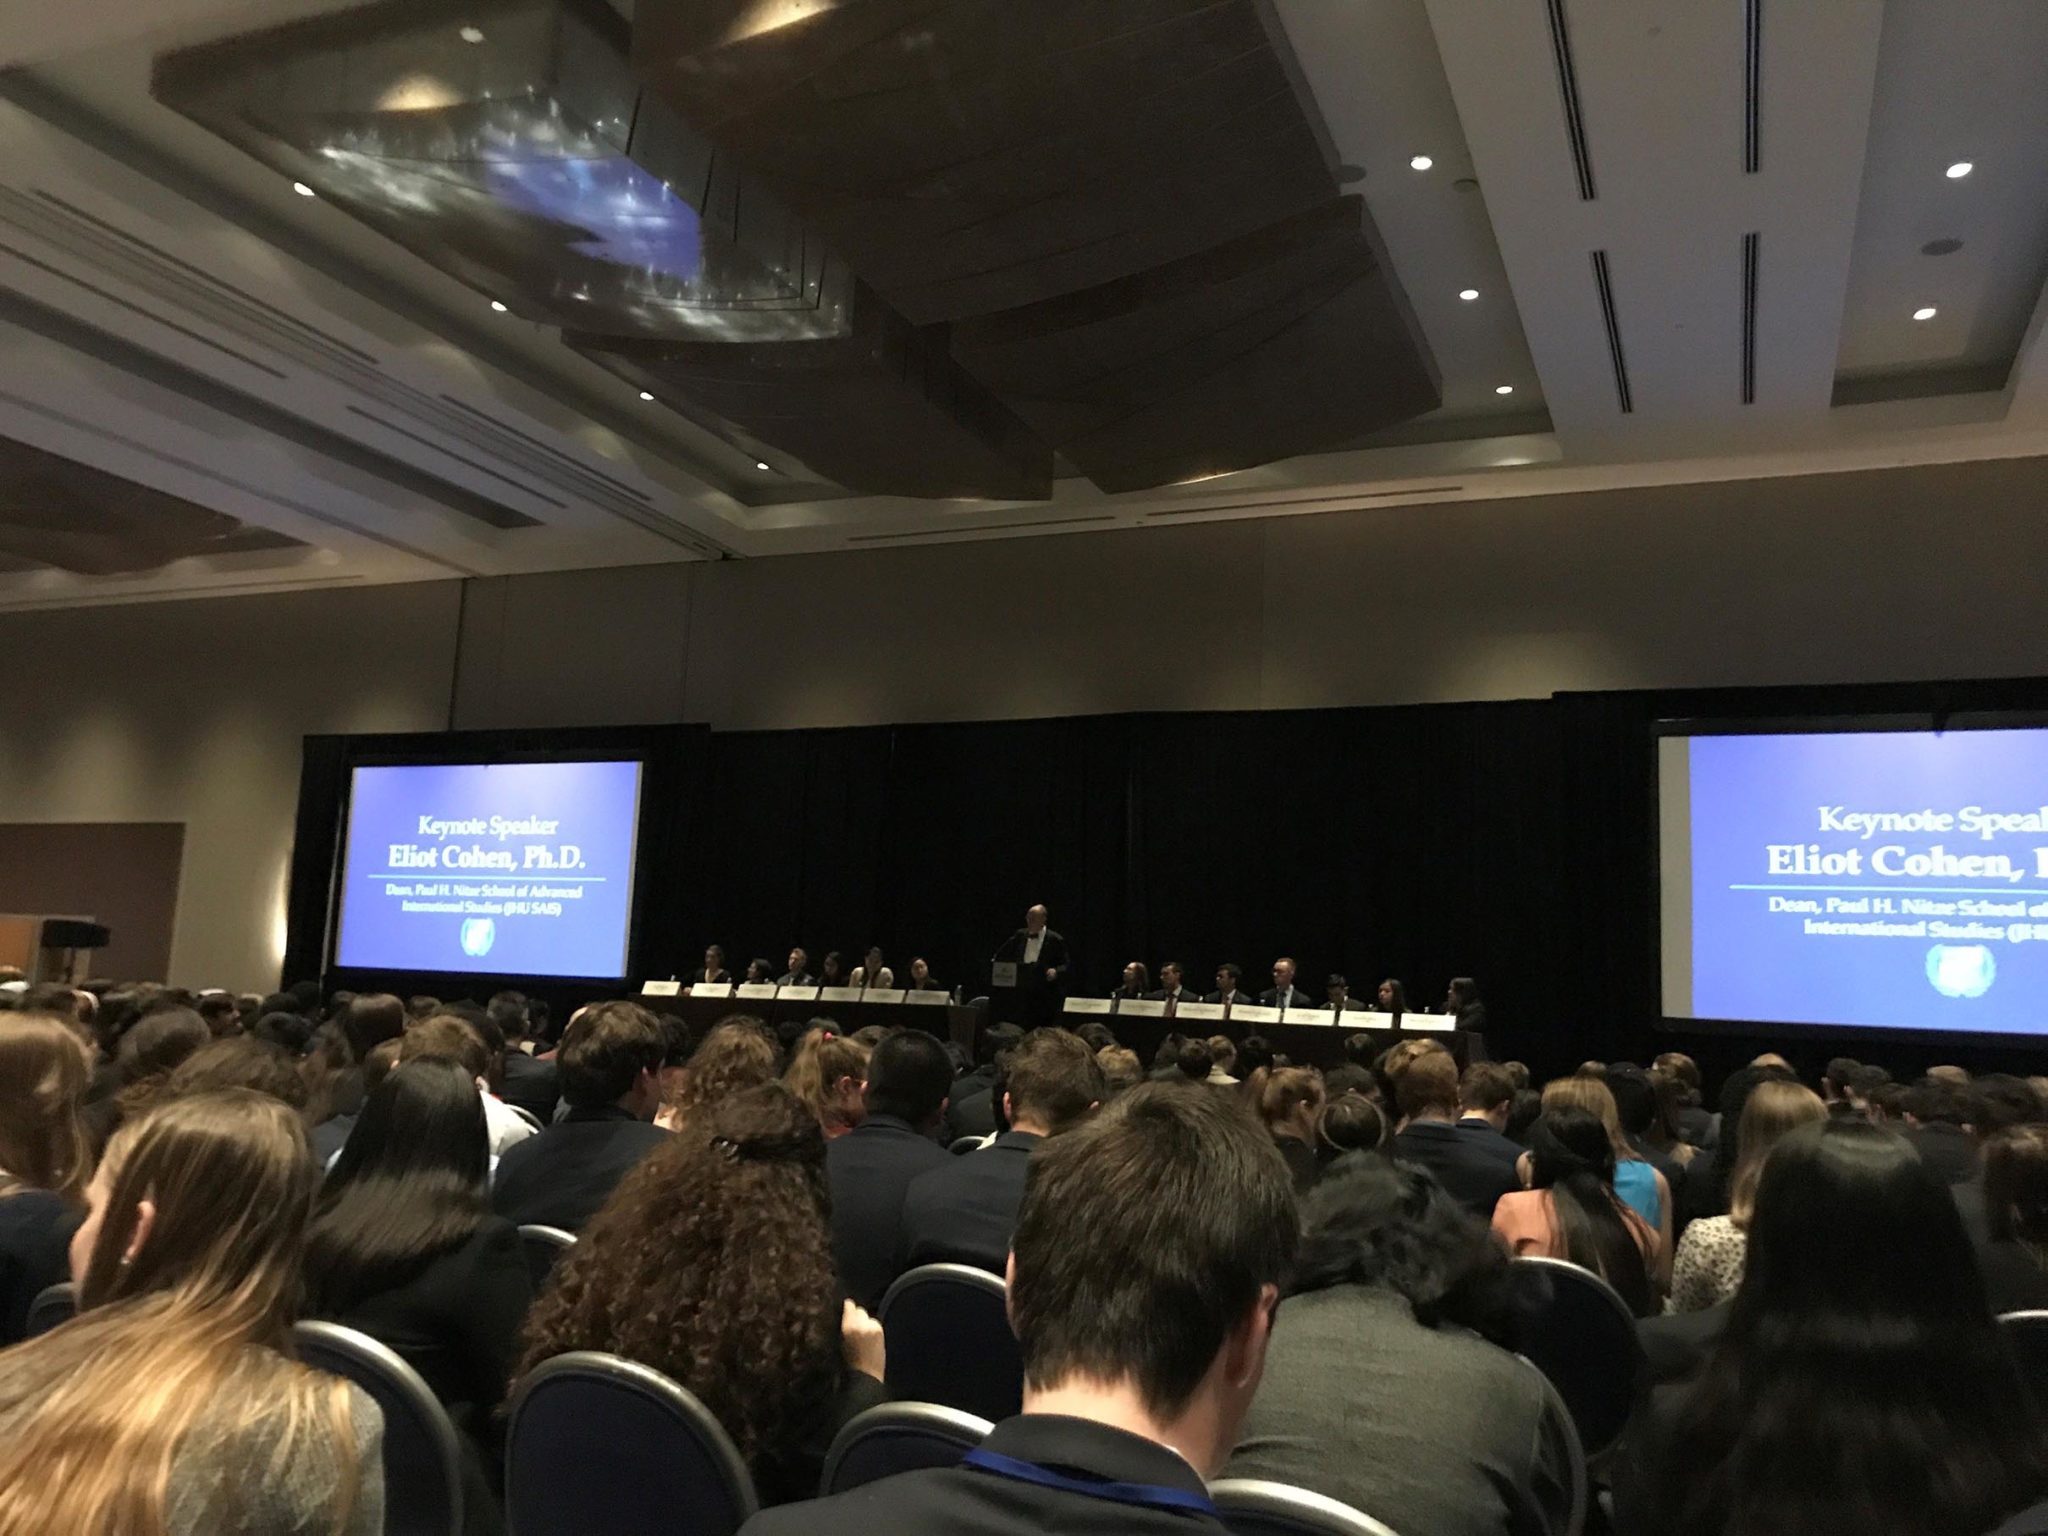 MW achieves notable results at the Johns Hopkins Model UN Conference